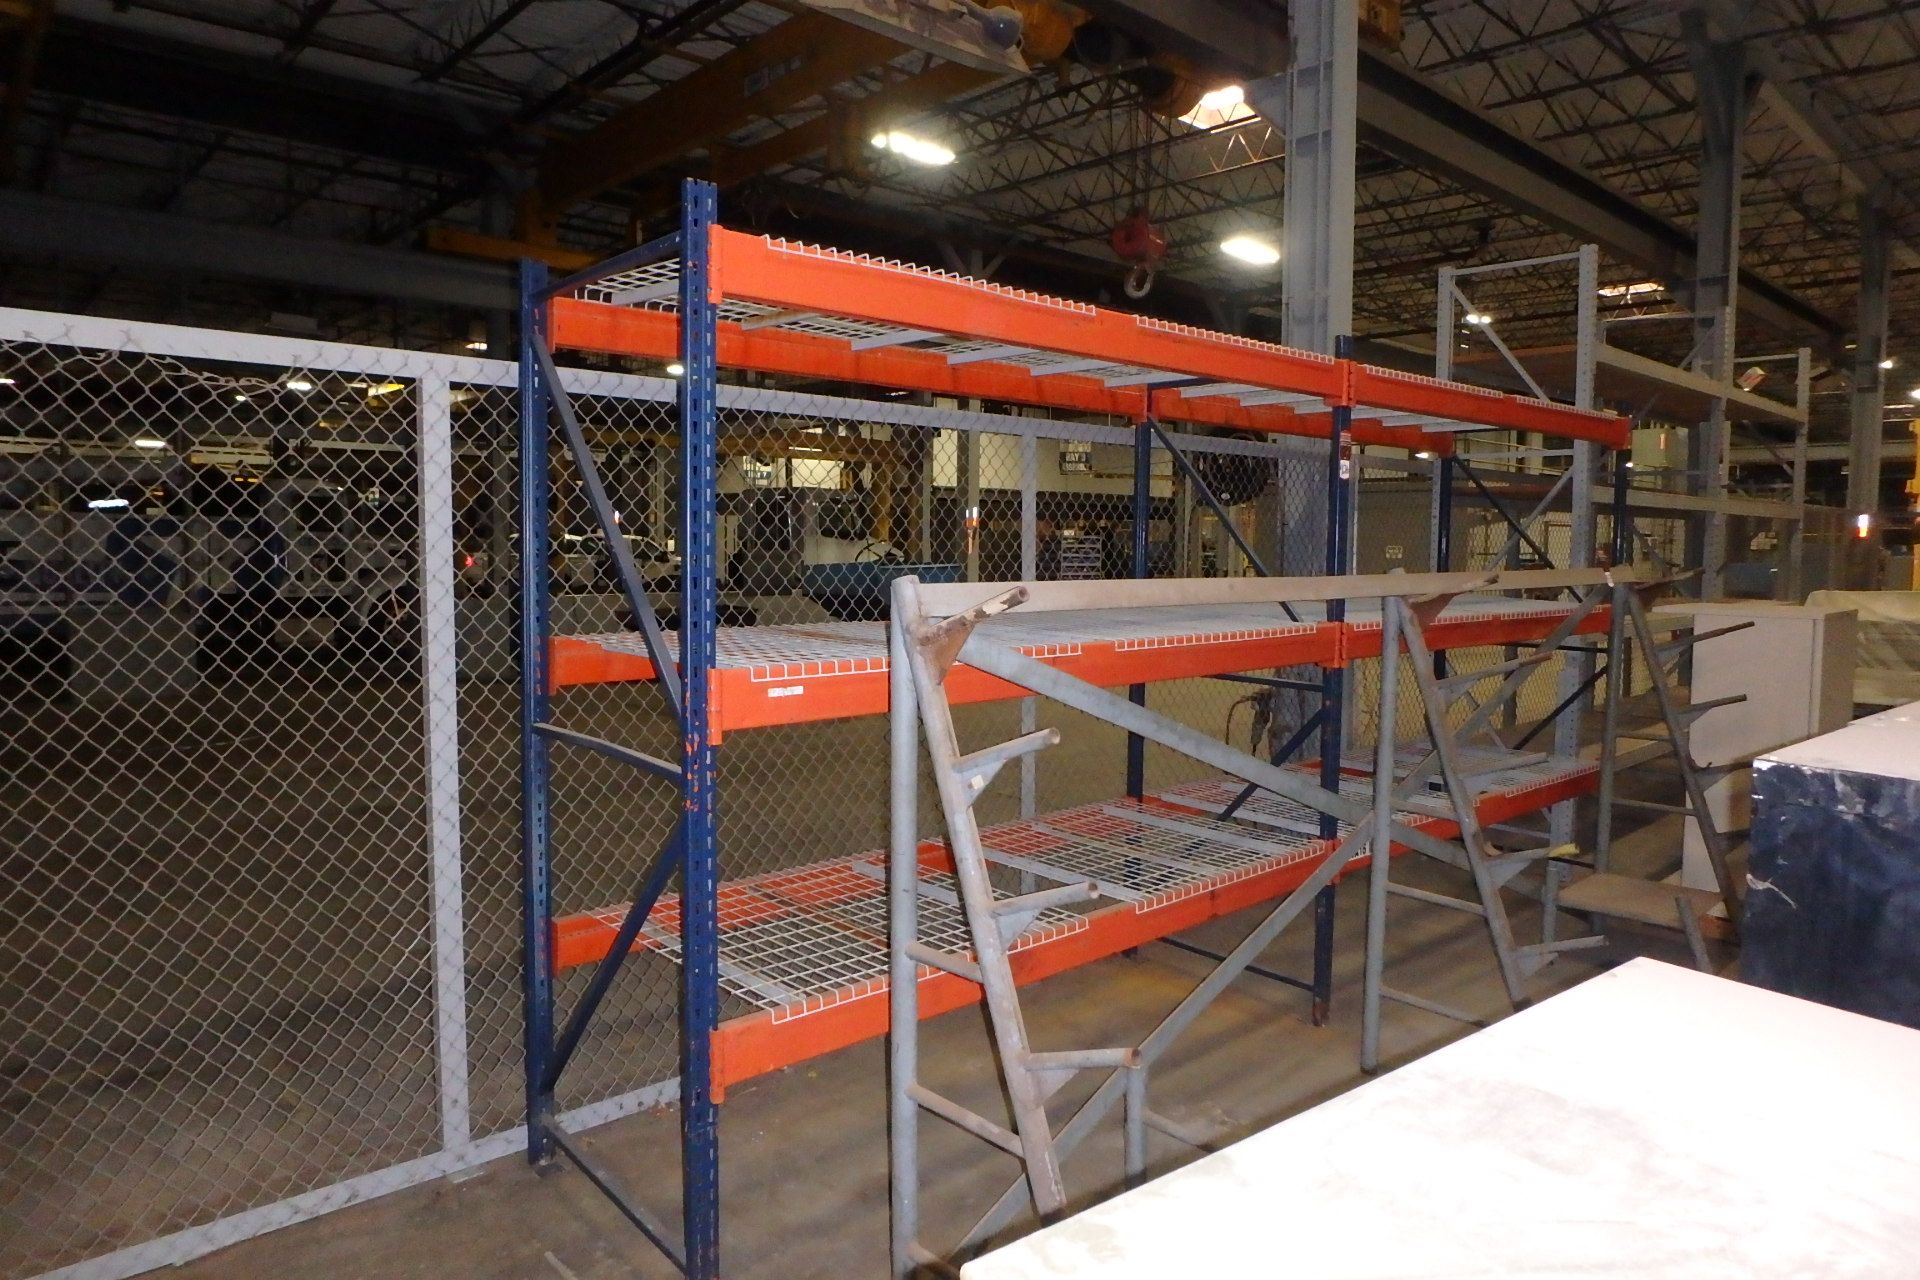 Lot Comprising (1) Section of Pallet Racking Consisting of: (2) 10' x 42" Uprights, (6) 9-1/2' Cross